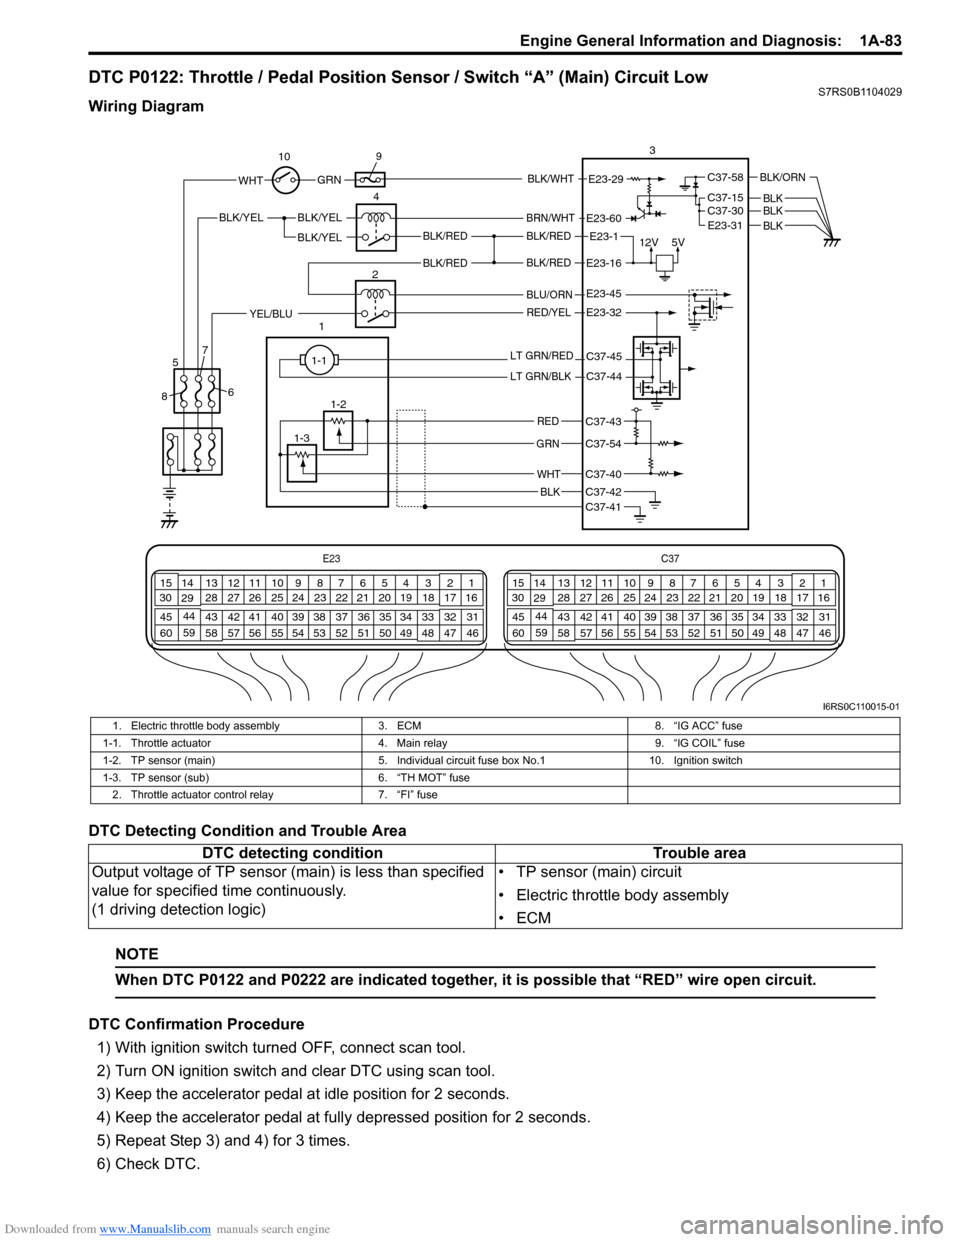 SUZUKI SWIFT 2007 2.G Service Workshop Manual Downloaded from www.Manualslib.com manuals search engine Engine General Information and Diagnosis:  1A-83
DTC P0122: Throttle / Pedal Position Sensor / Switch “A” (Main) Circuit LowS7RS0B1104029
W